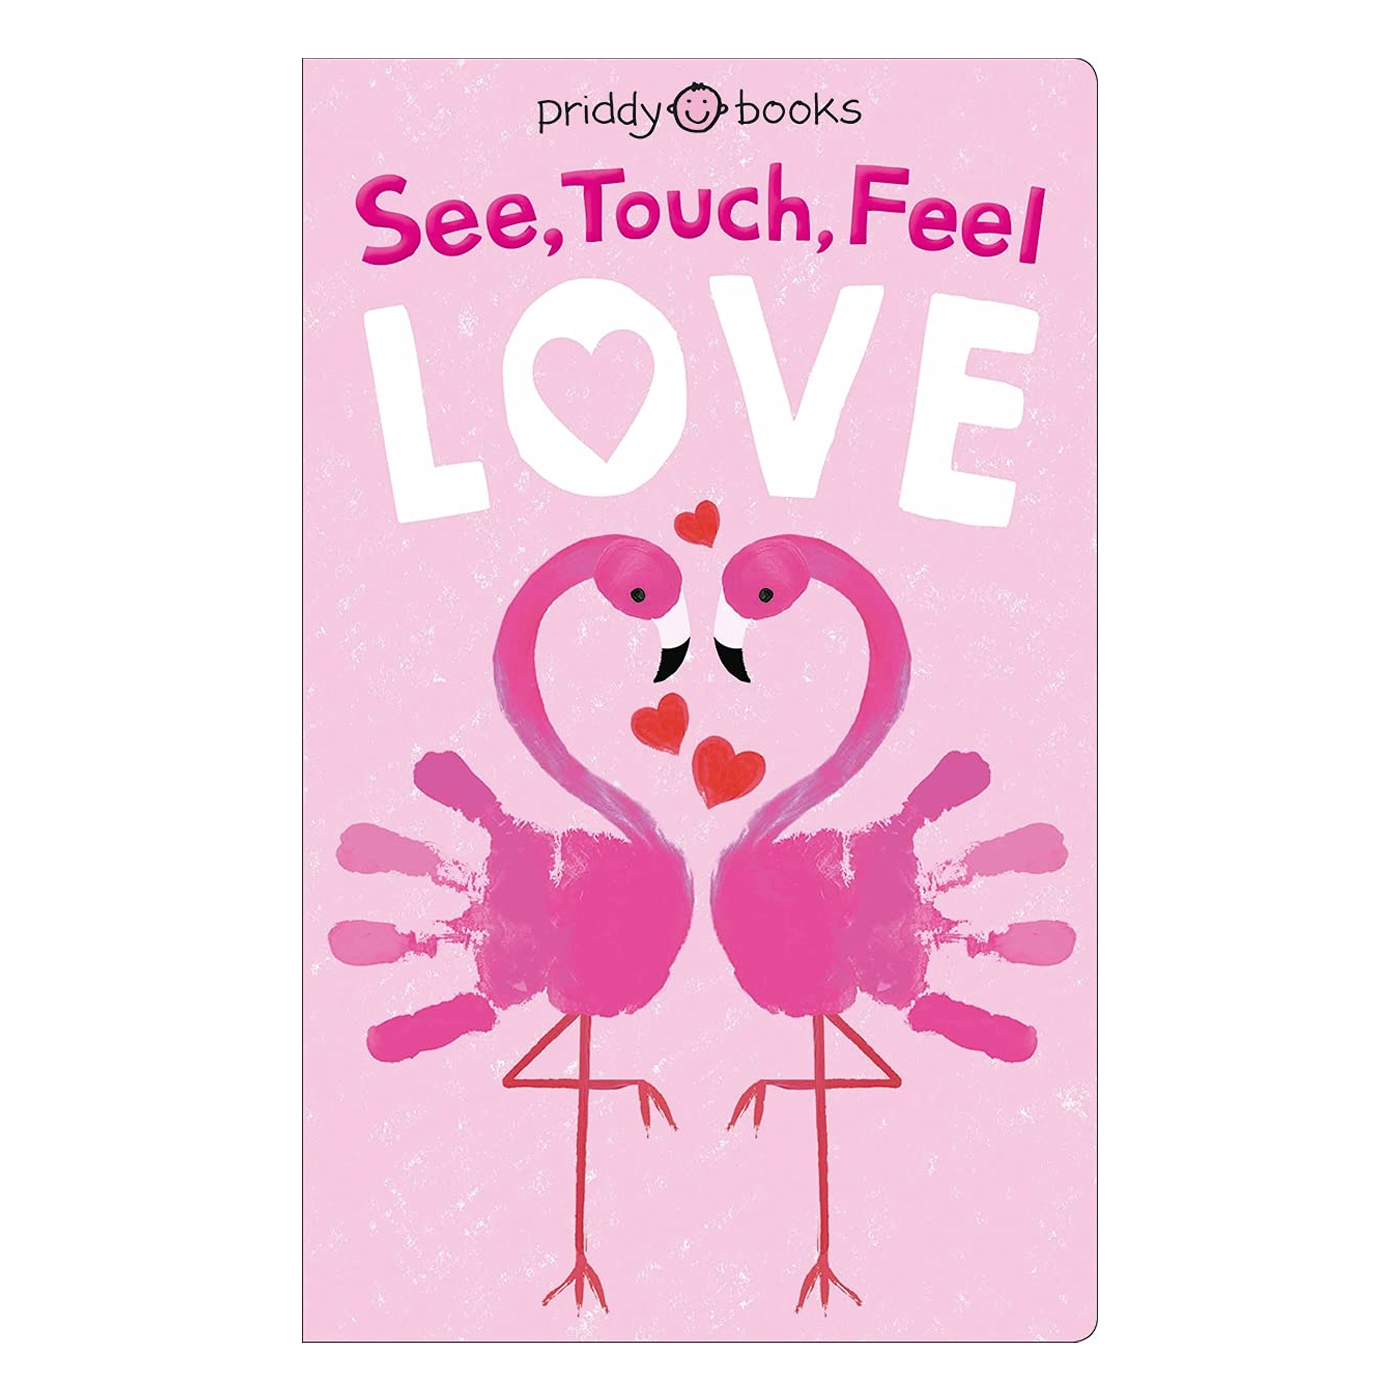  See, Touch, Feel Love